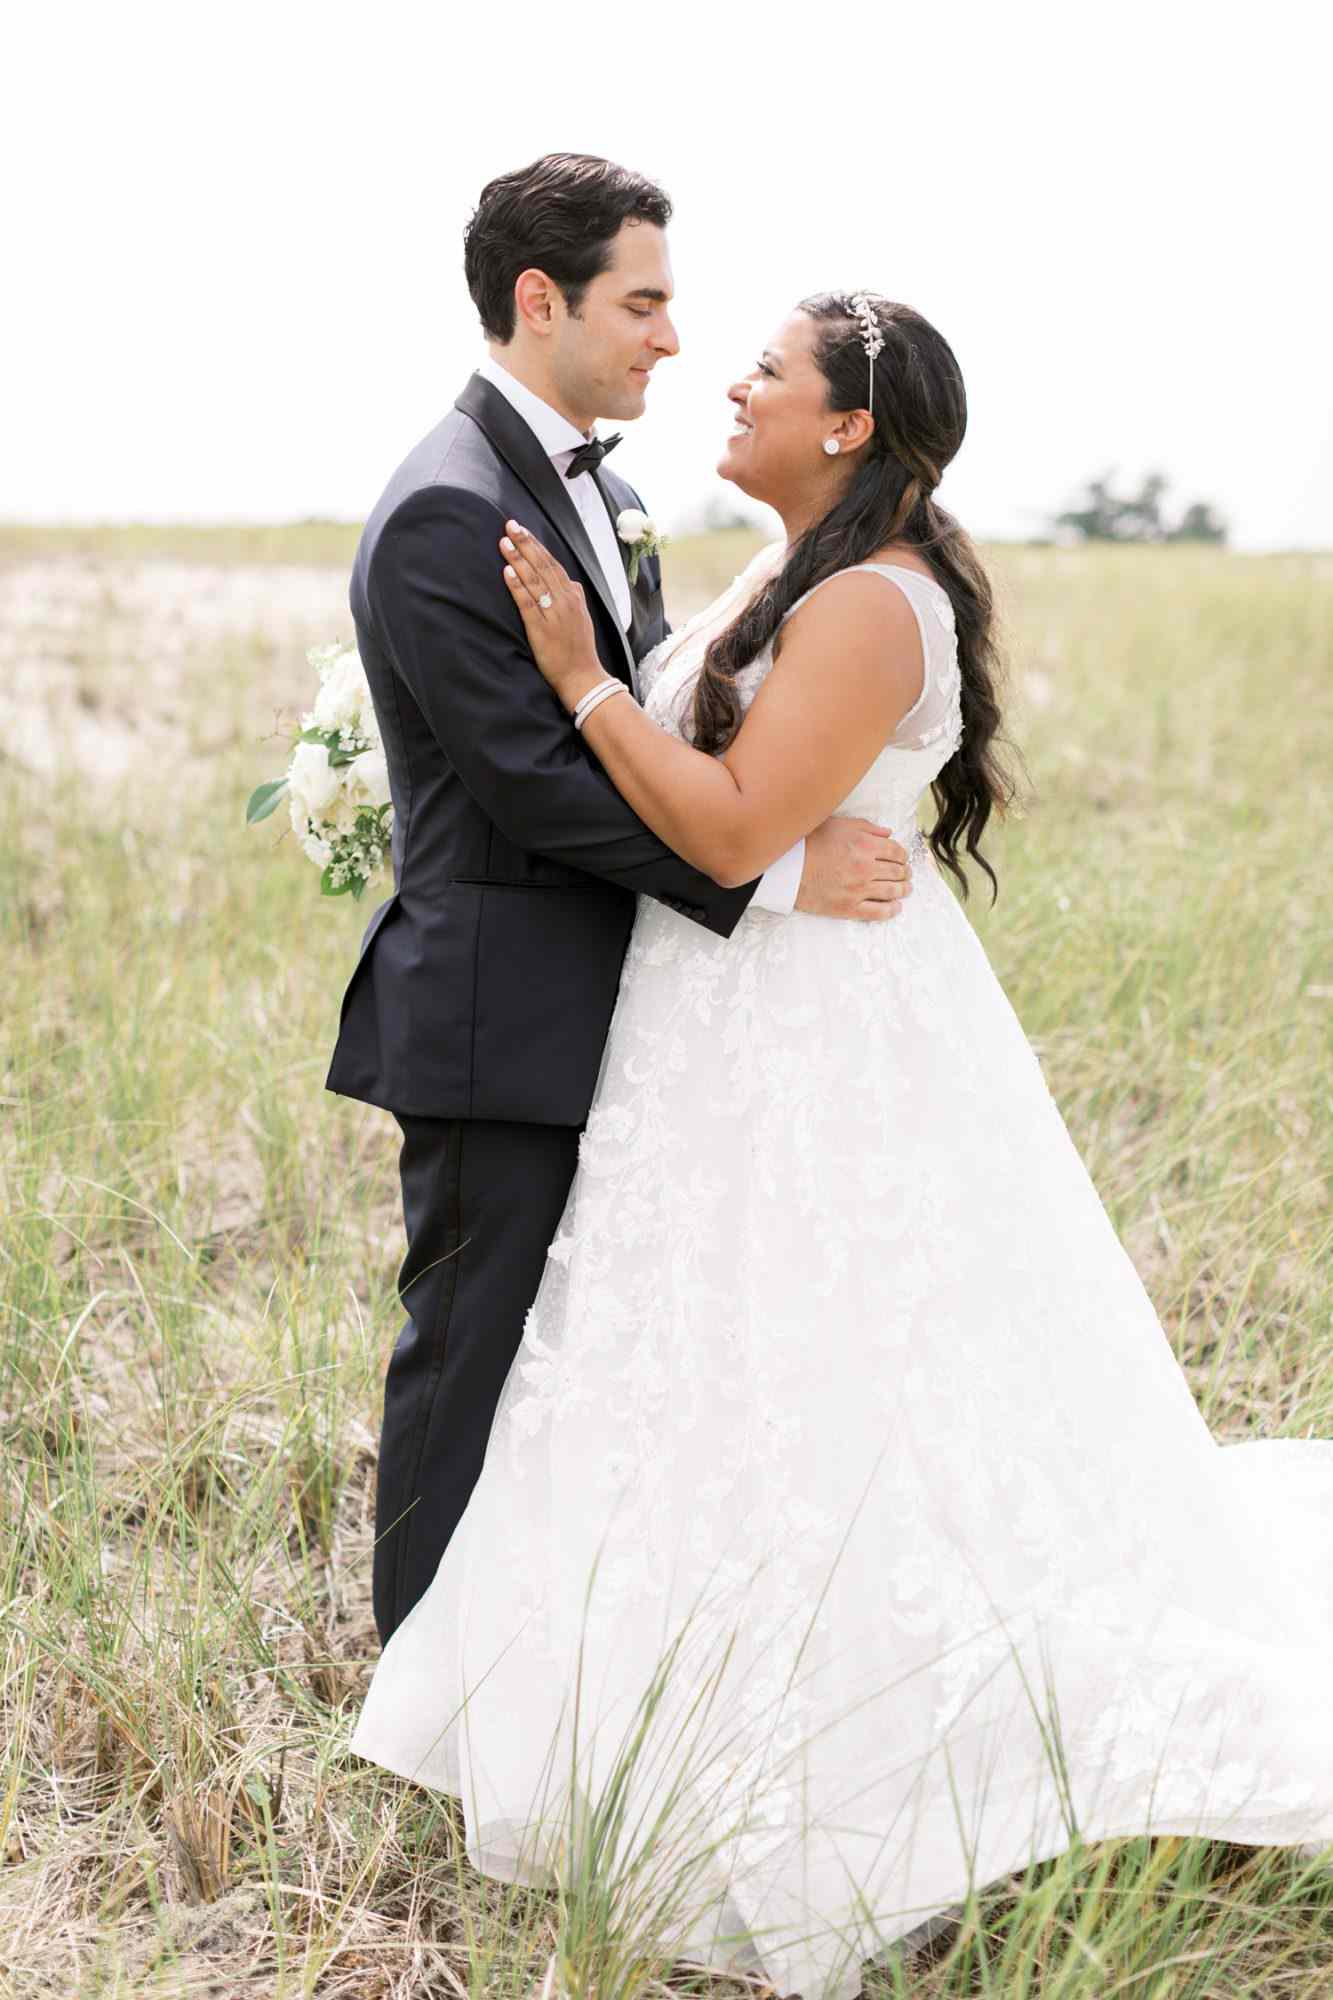 bride and groom smiling at one another in field of tall grass